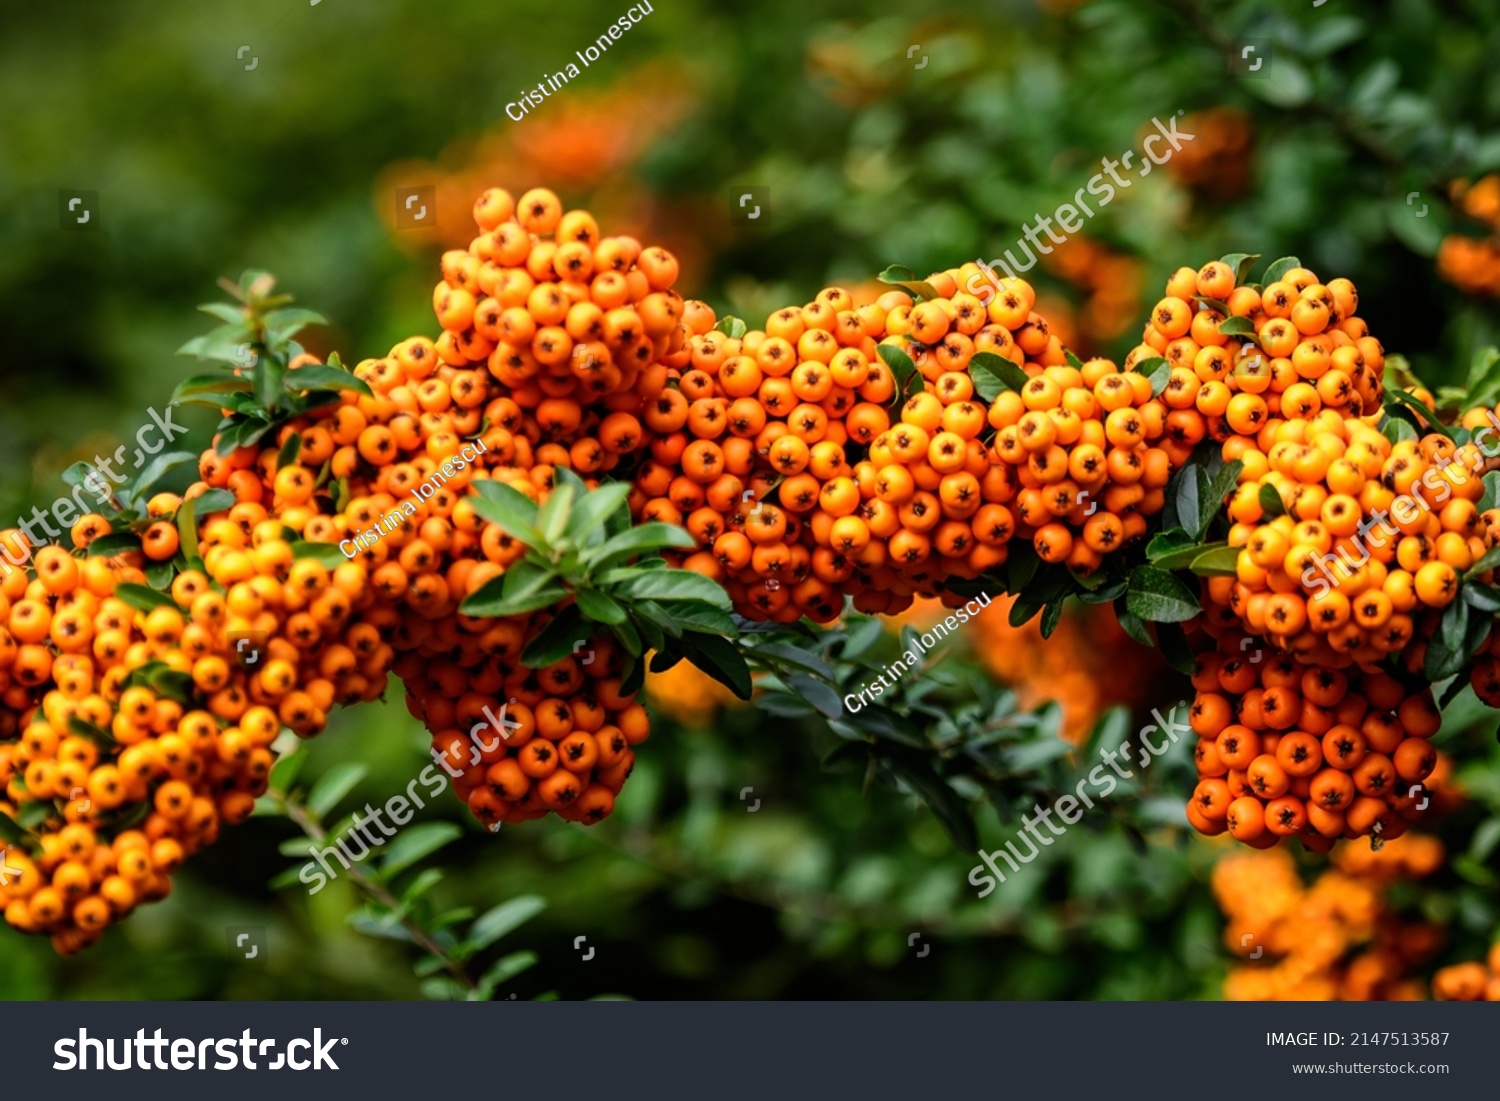 Small yellow and orange fruits or berries of Pyracantha plant, also known as firethorn in a garden in a sunny autumn day, beautiful outdoor floral background photographed with soft focus #2147513587